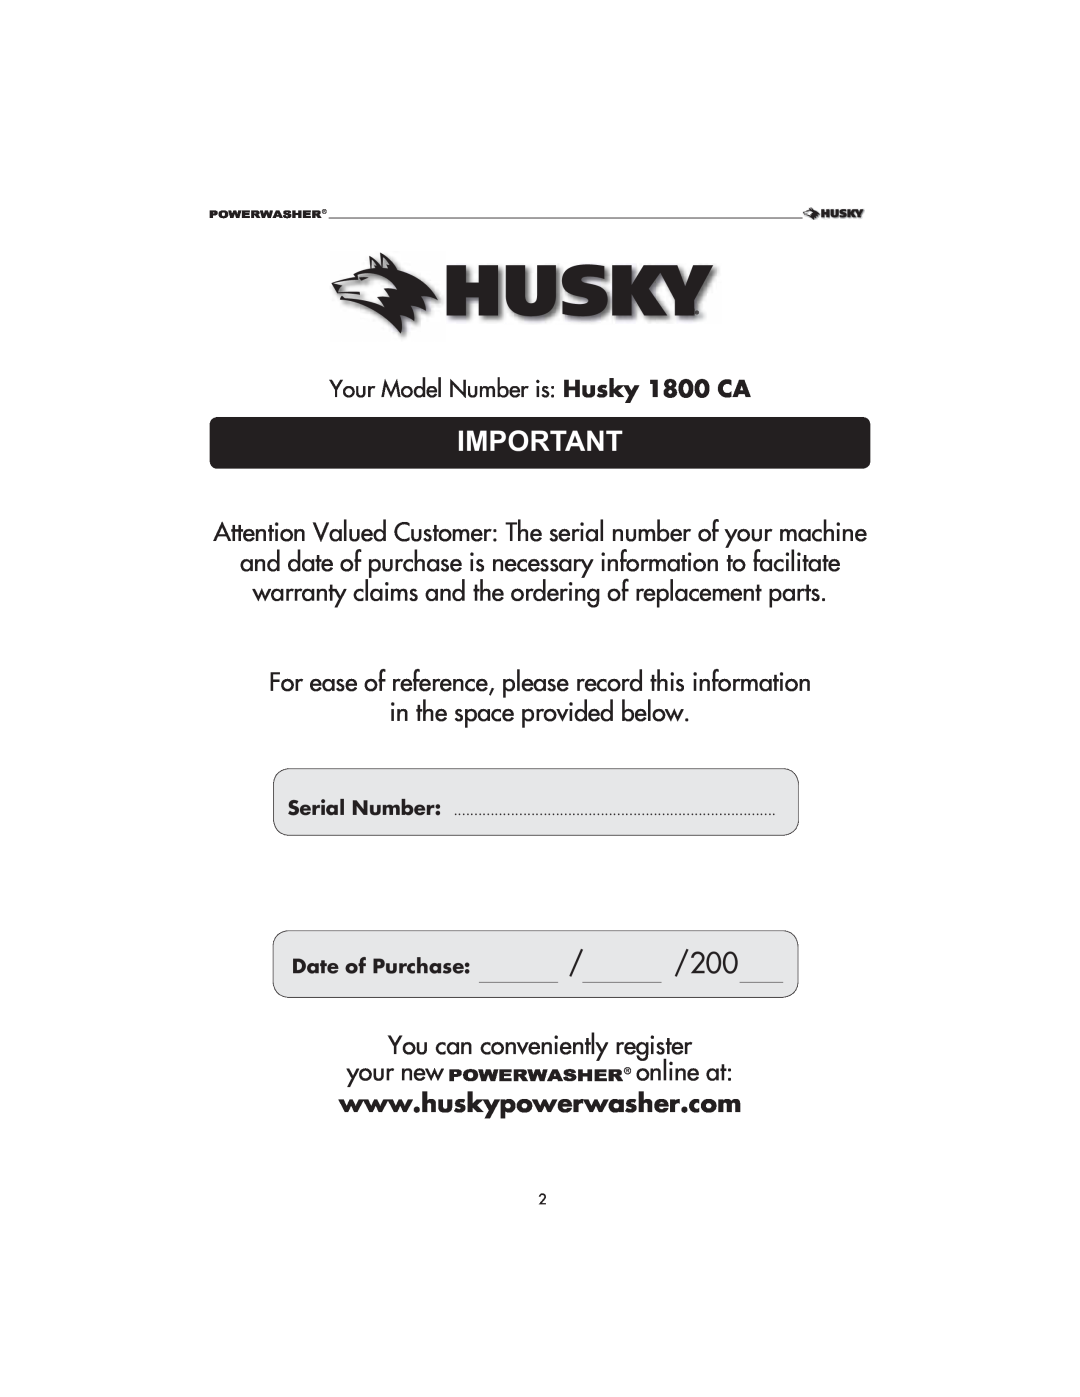 Husky 1800 CA manual For ease of reference, please record this information, in the space provided below, Date of Purchase 